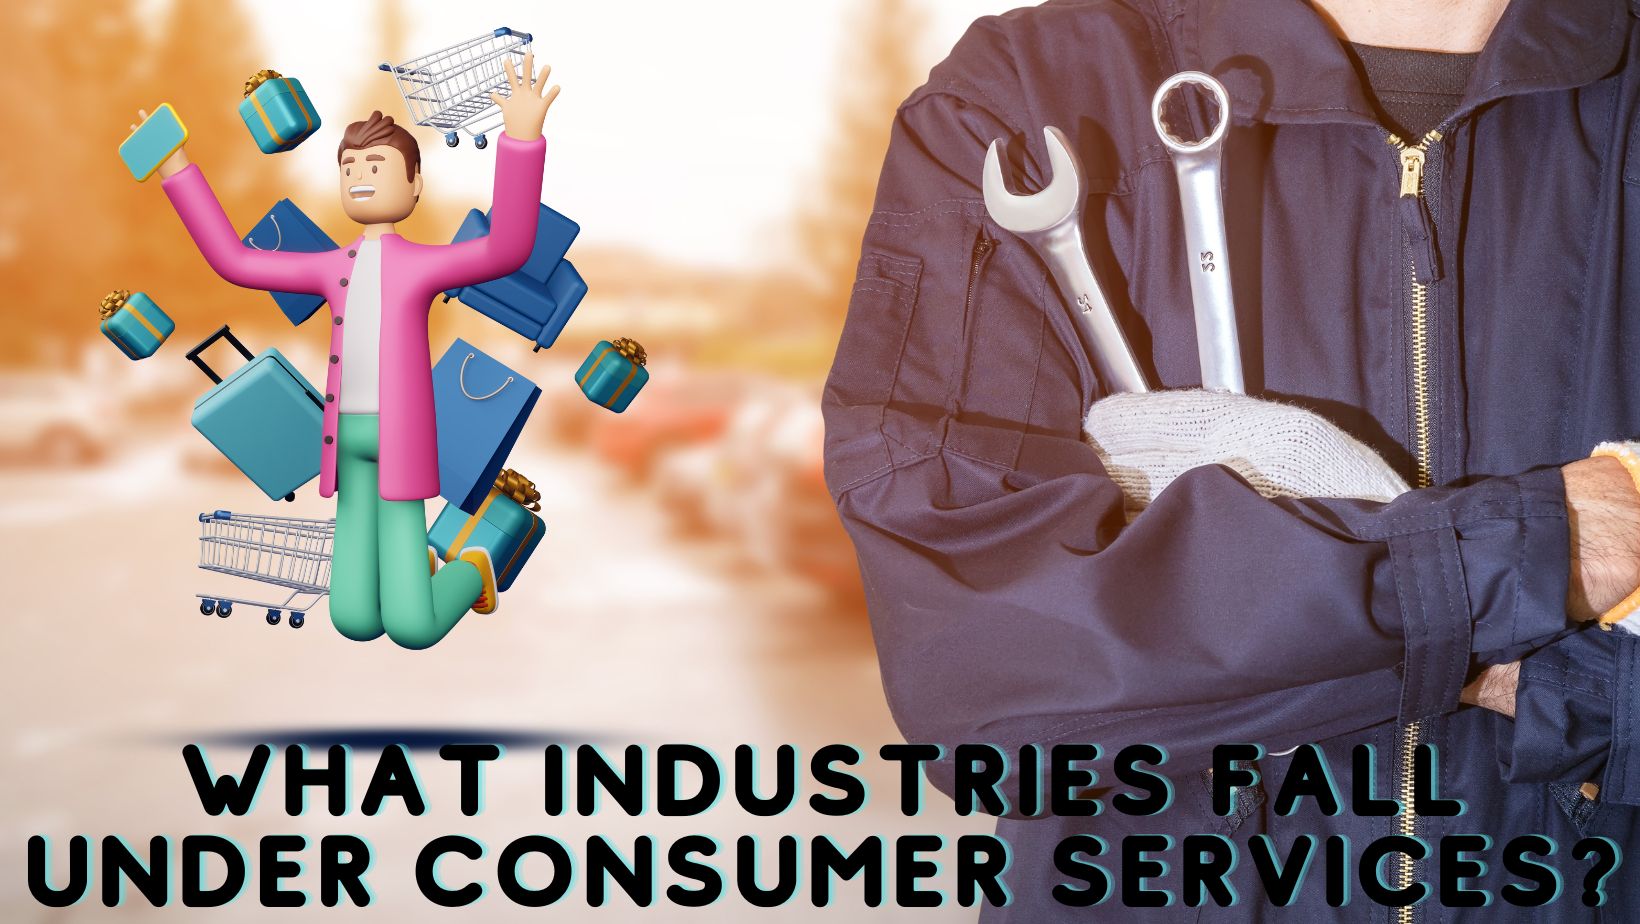 what companies are in the consumer services field